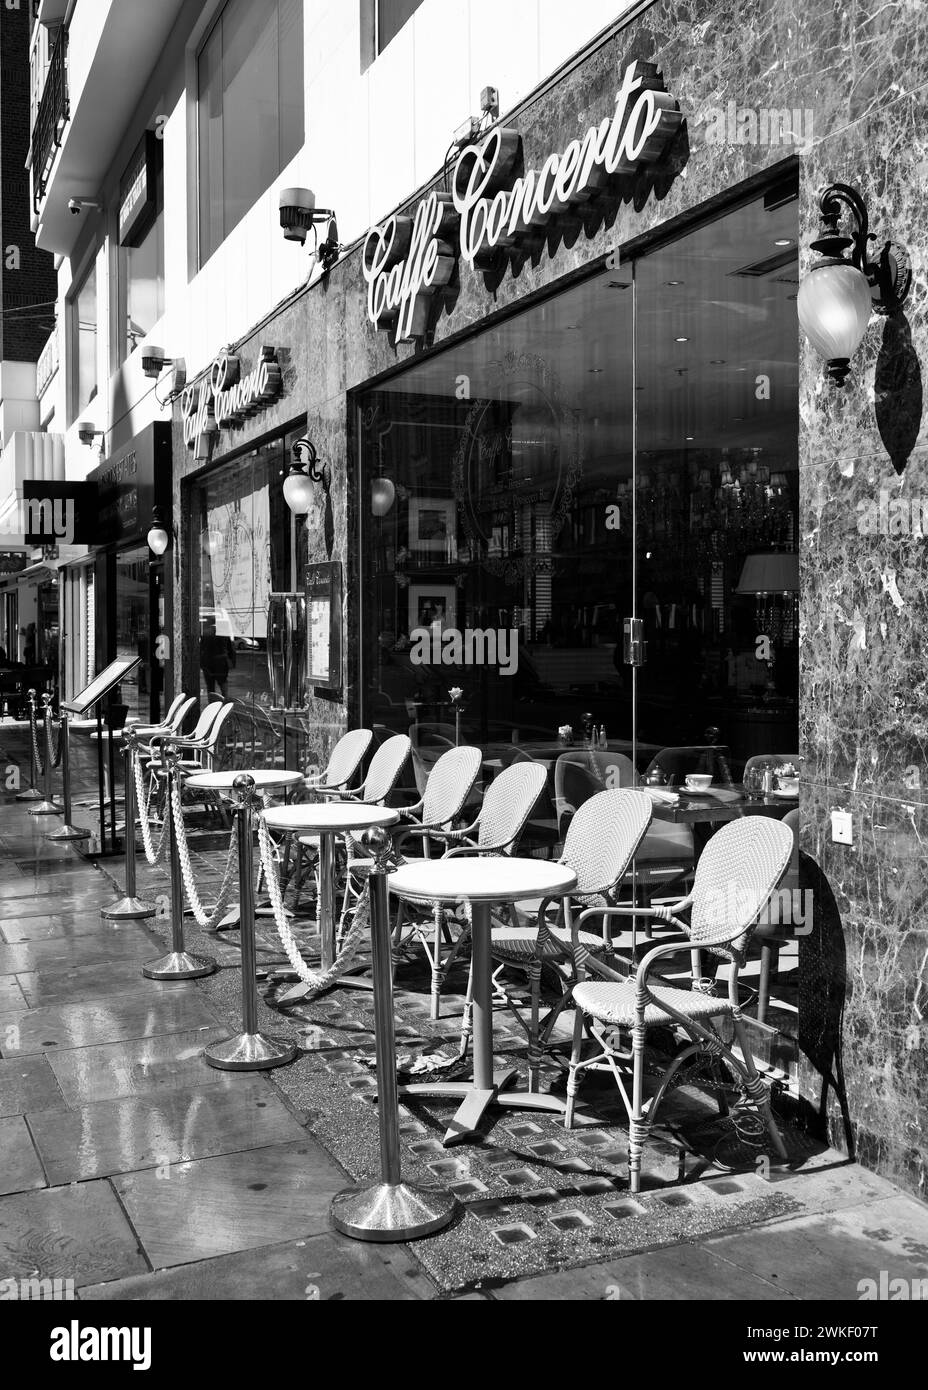 Taken early in the morning on Kensington High Street just sat the cafe was setting up. Stock Photo